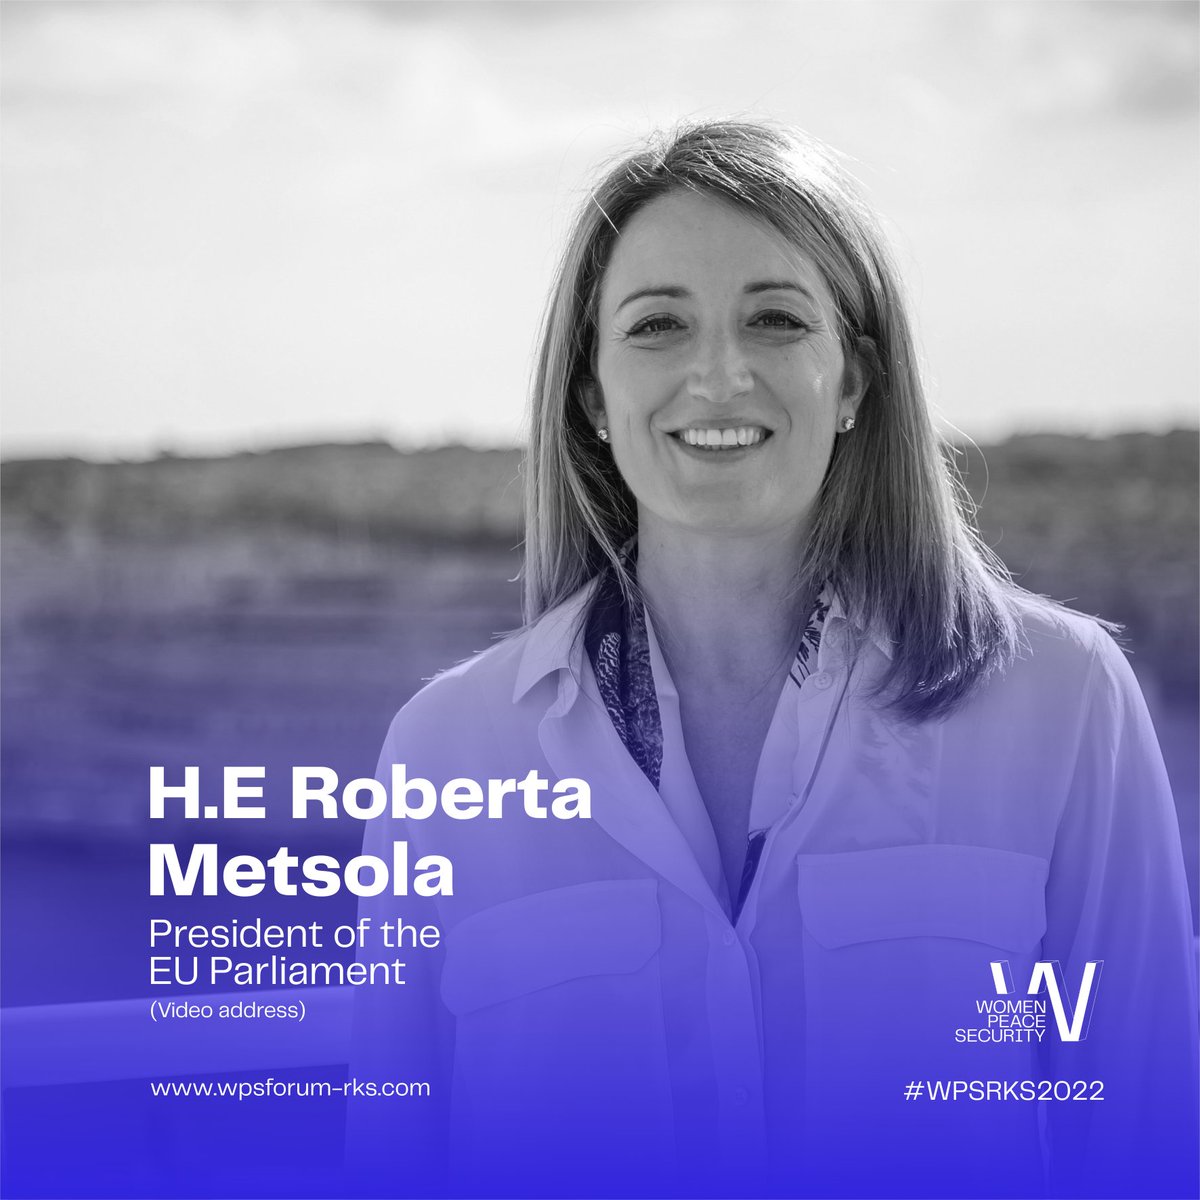 The President of the @Europarl_EN, Roberta Metsola, will deliver a video address at the inaugural edition of the #WPSRKS2022! 🇽🇰🇪🇺 ⏰ 22-23 October 2022 👉 wpsforum-rks.com